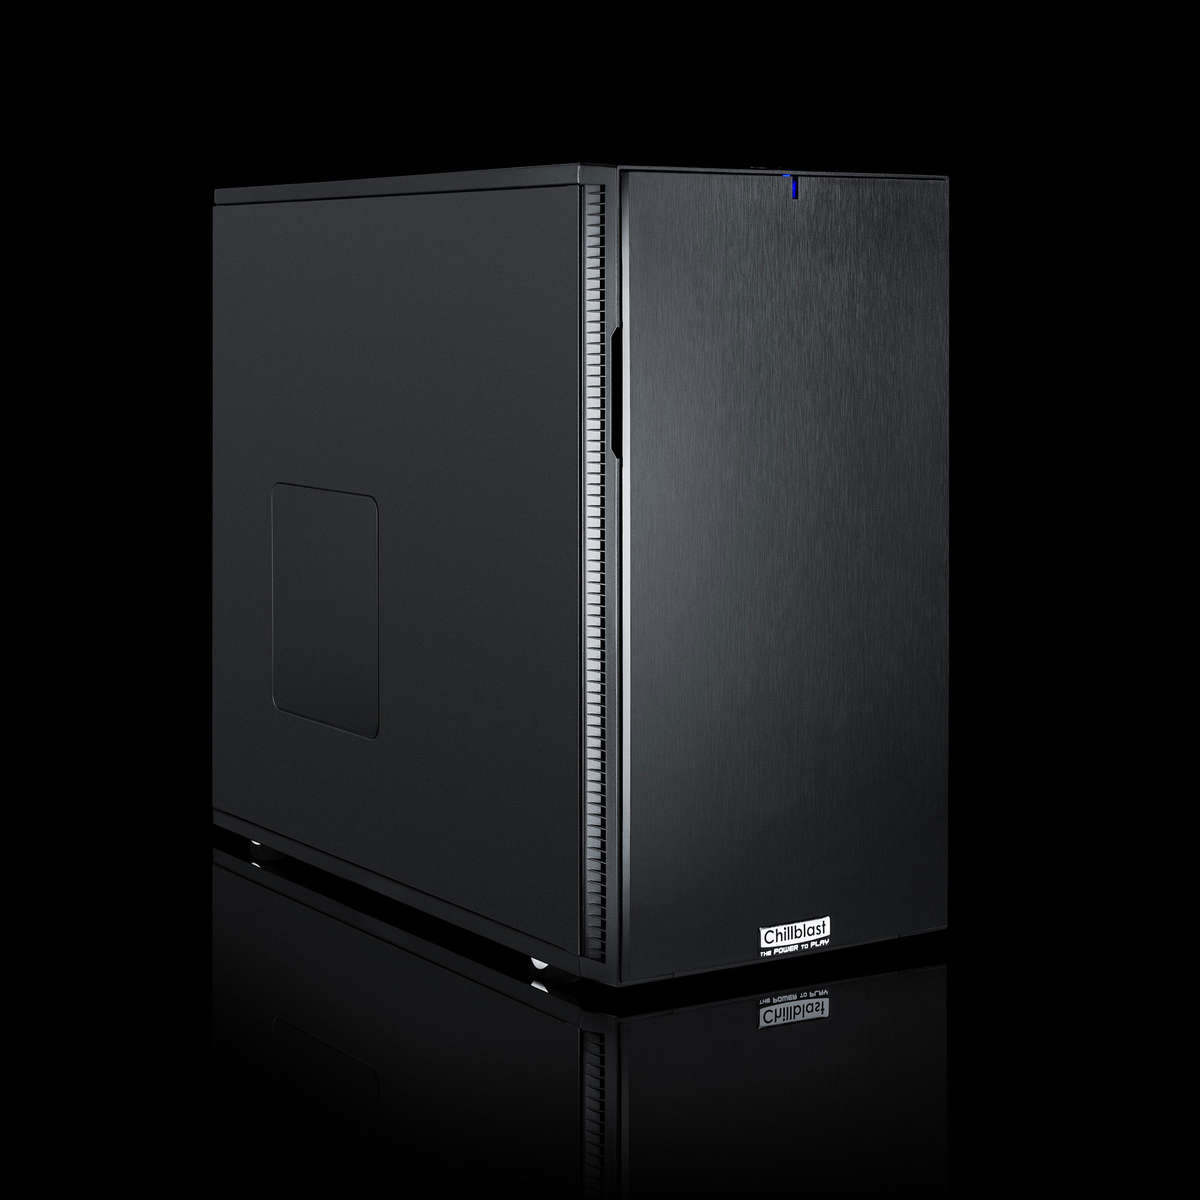 Image of the pre-built Chillblast Wraith Elite Gaming PC against a dark background.